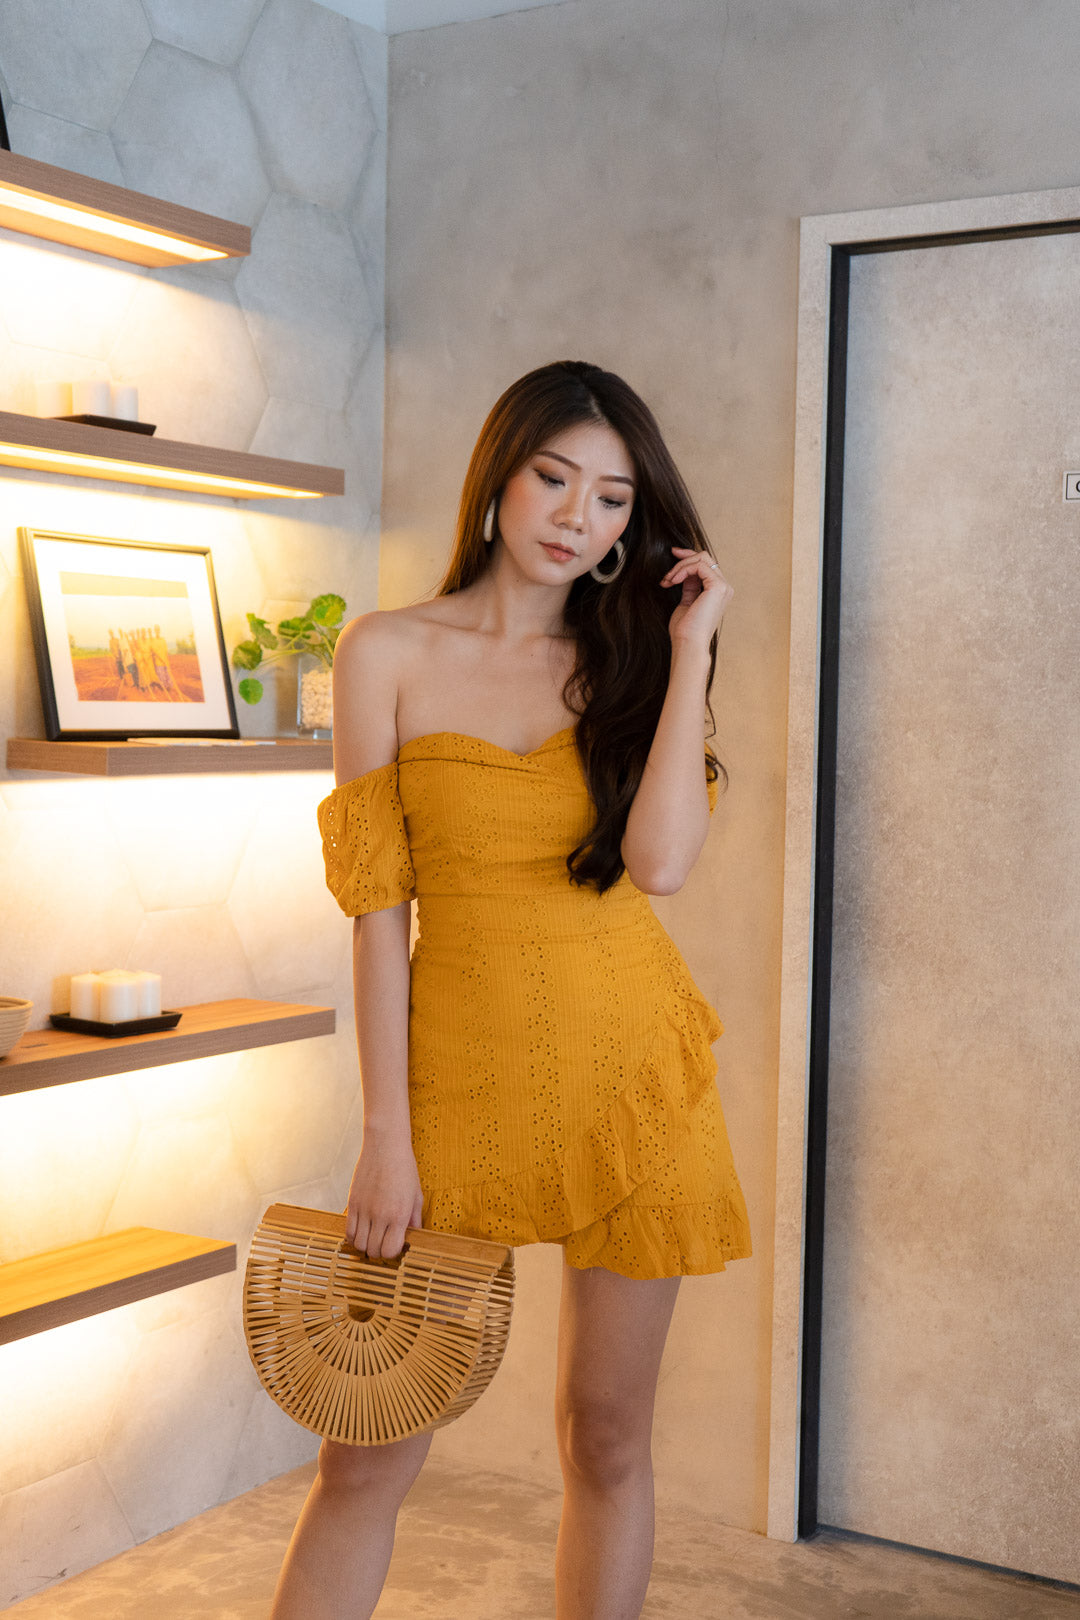 * PREMIUM * Audrilia Crochet Bustier Romper in Mustard Yellow - Self Manufactured by LBRLABEL